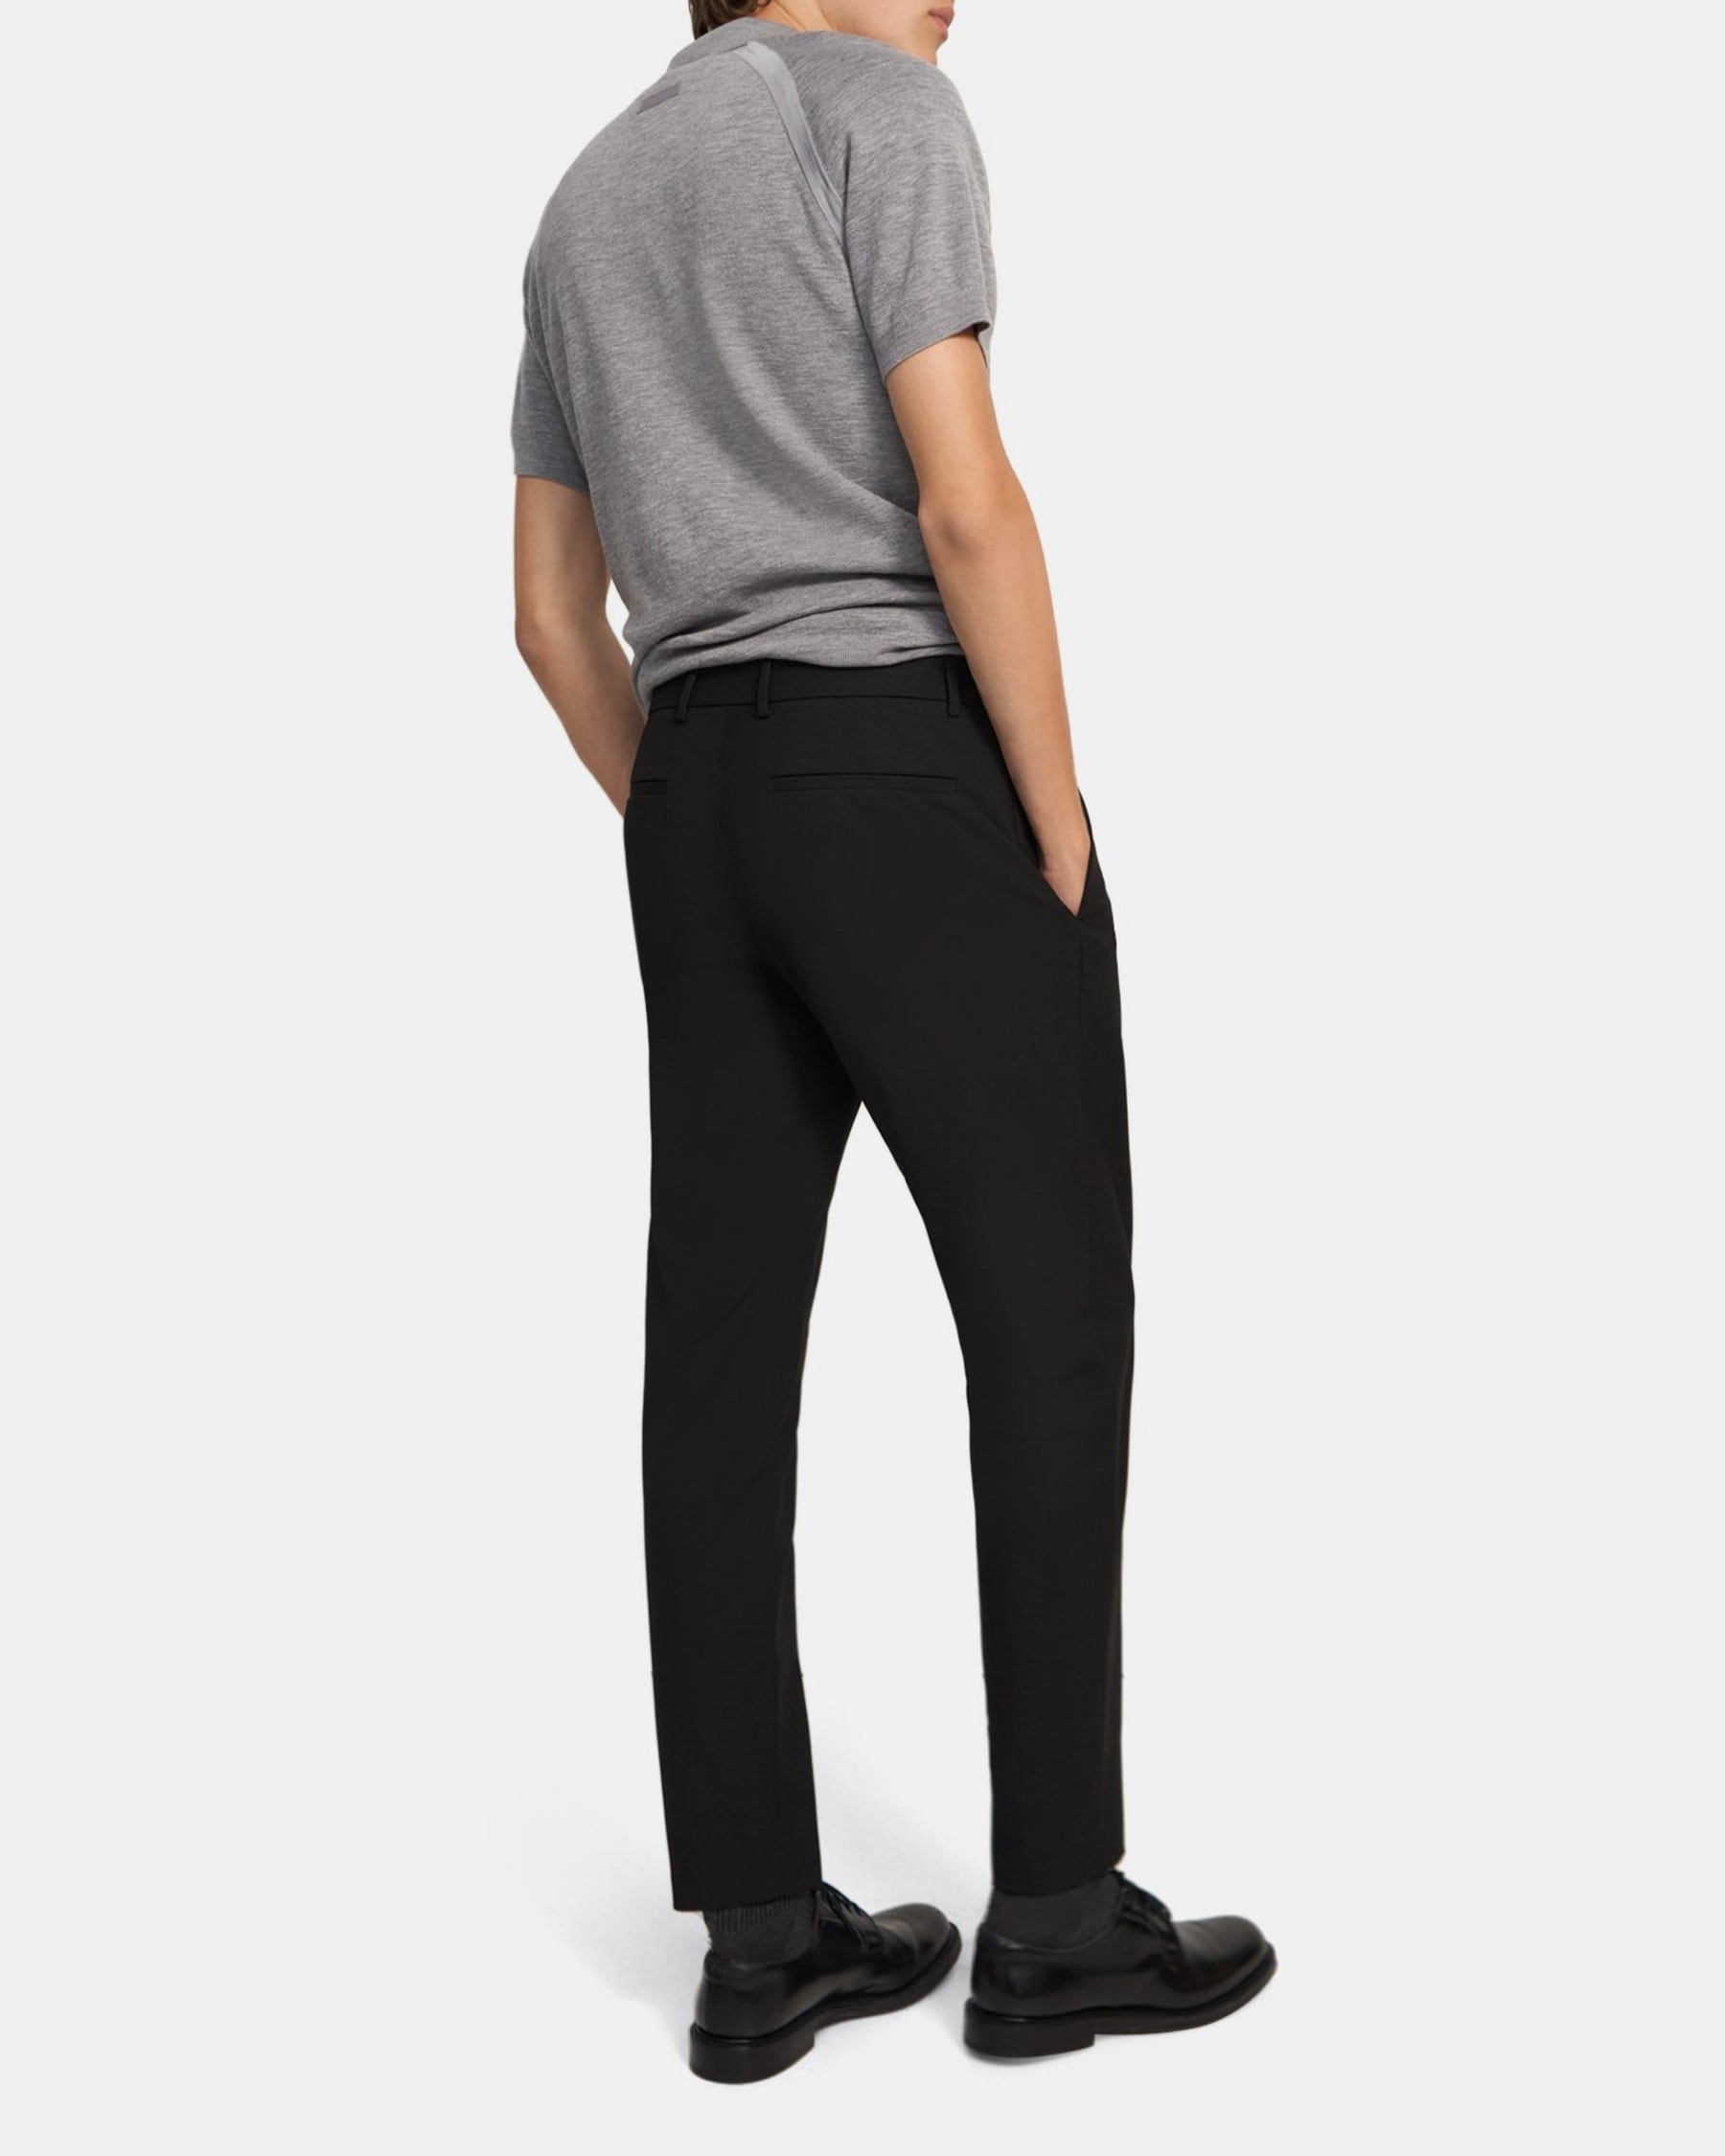 Curtis Pant in Bond Wool Twill